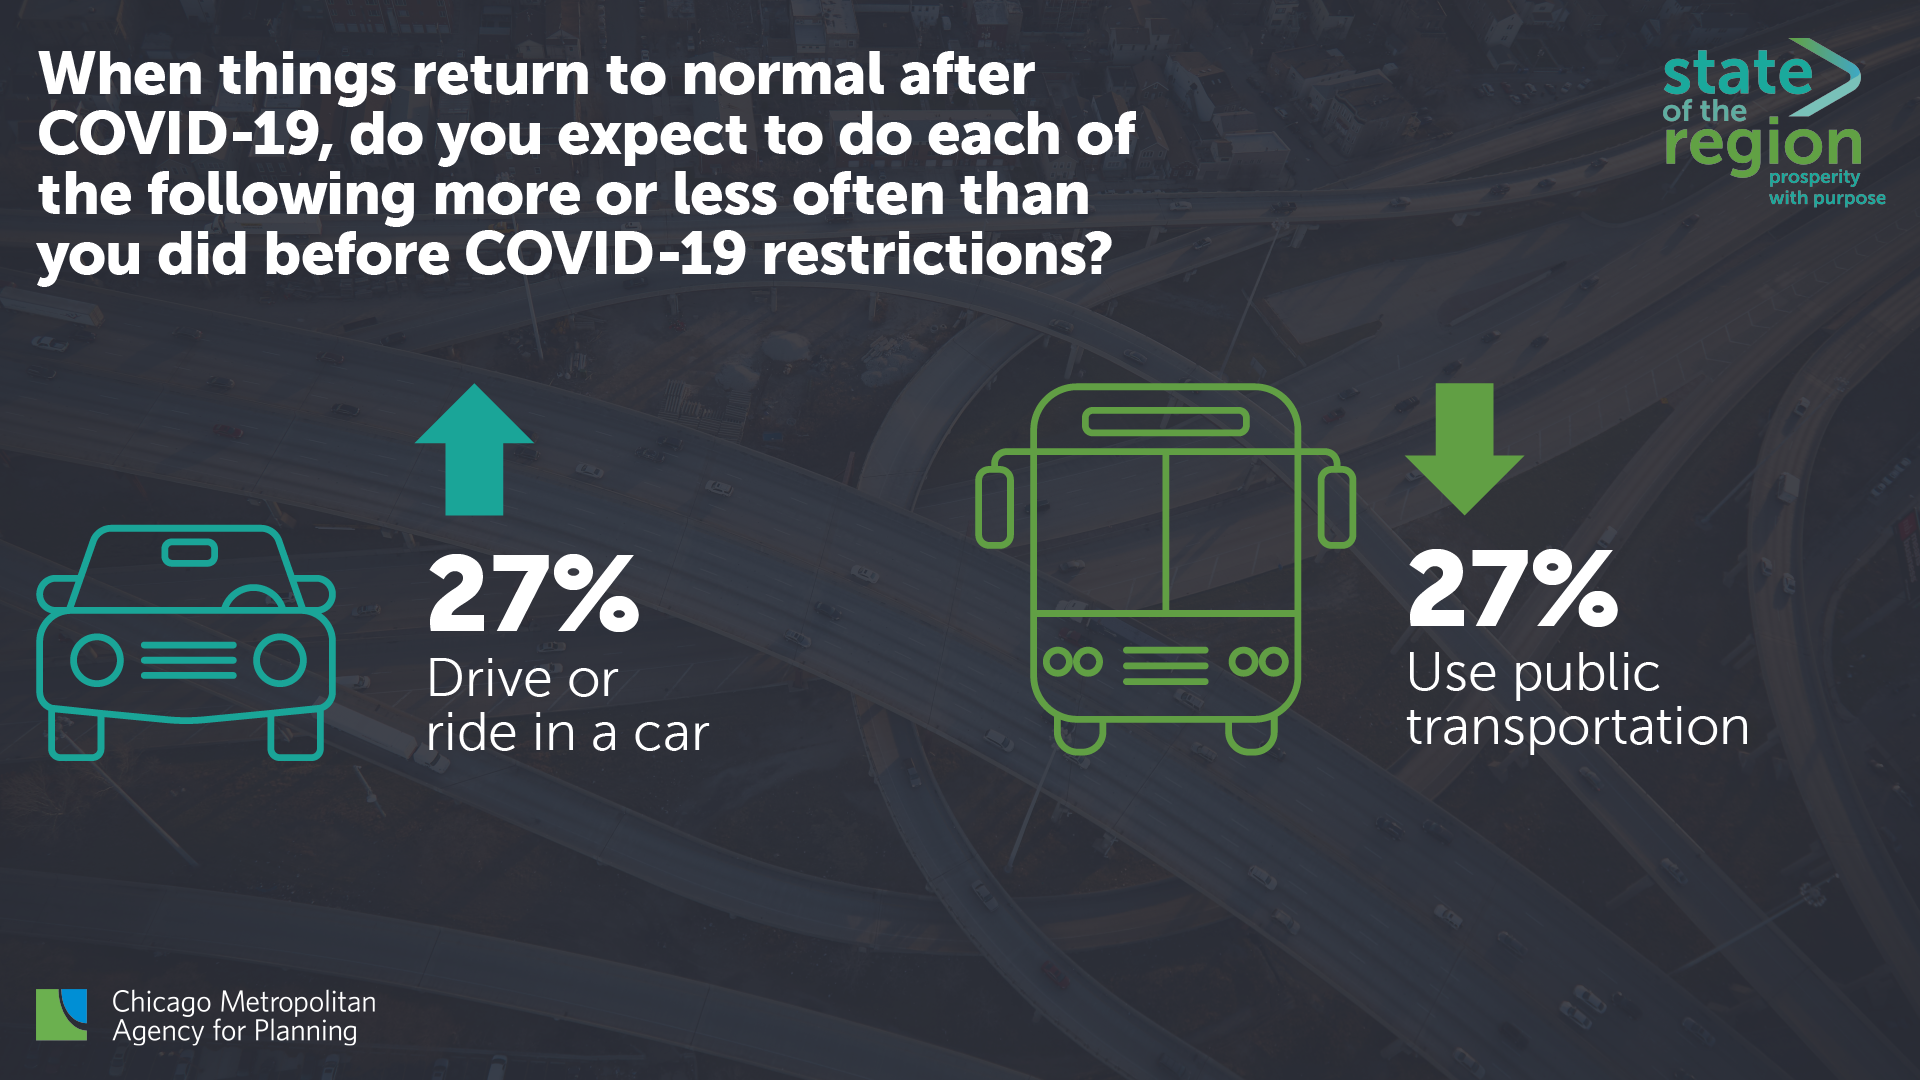 When things return to normal after covid, 27% of respondents expect to drive more frequently and 27% expect to use public transportation less